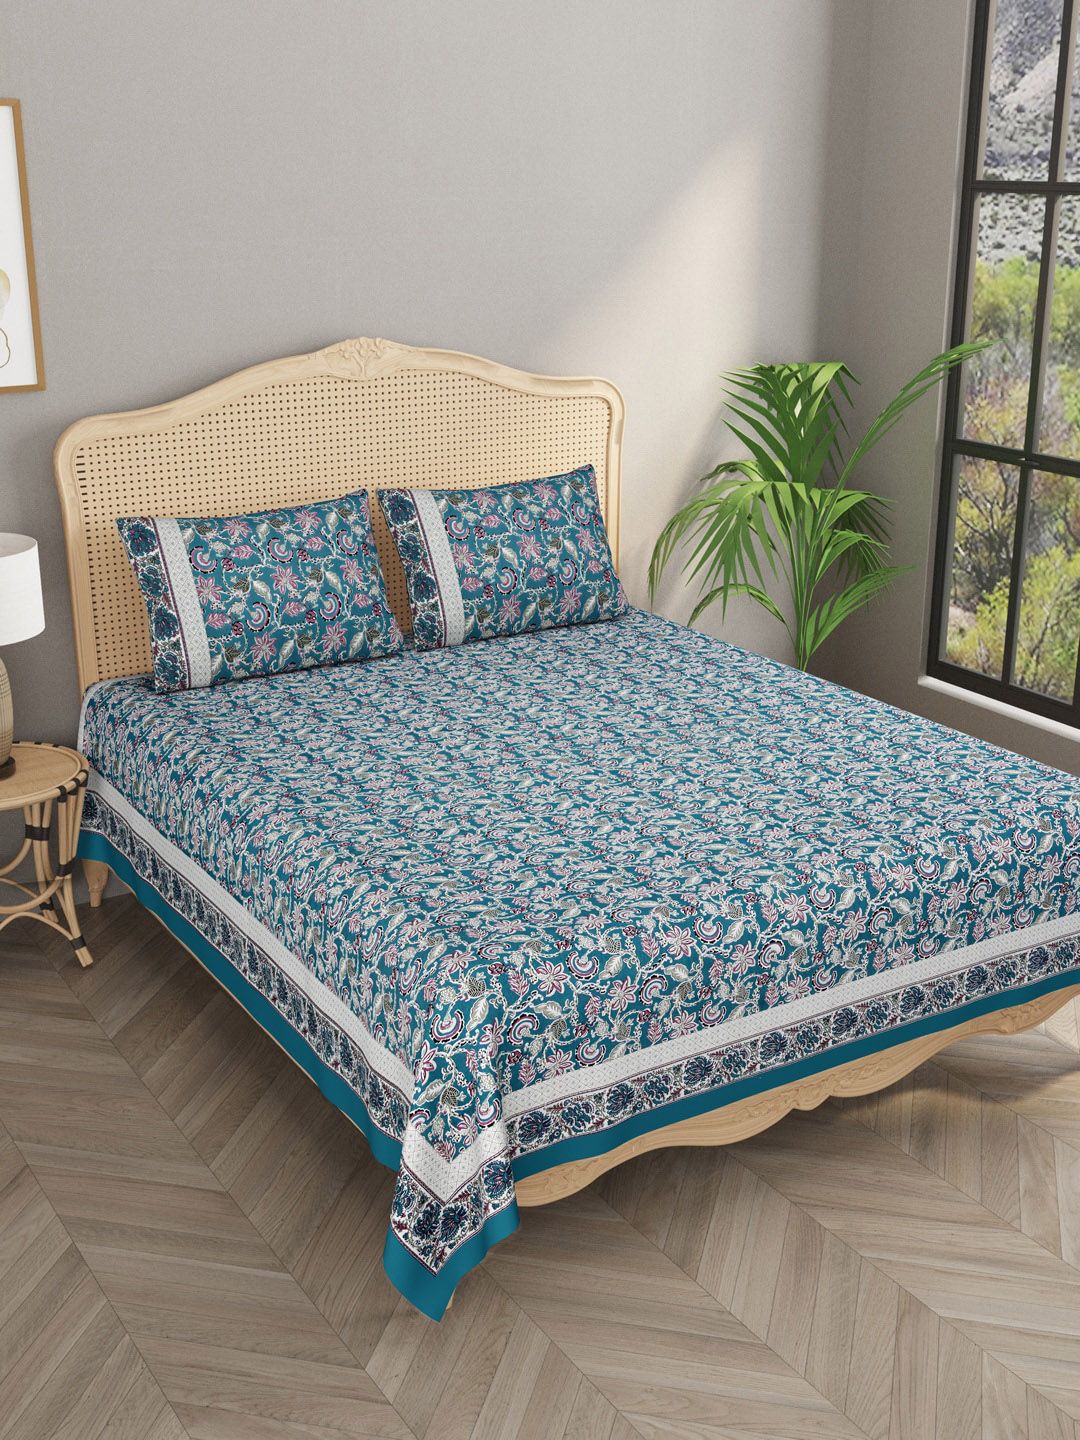 Gulaab Jaipur Unisex Blue &White Floral Printed 600 TC Cotton Bedsheet With 2 Pillowcovers Price in India